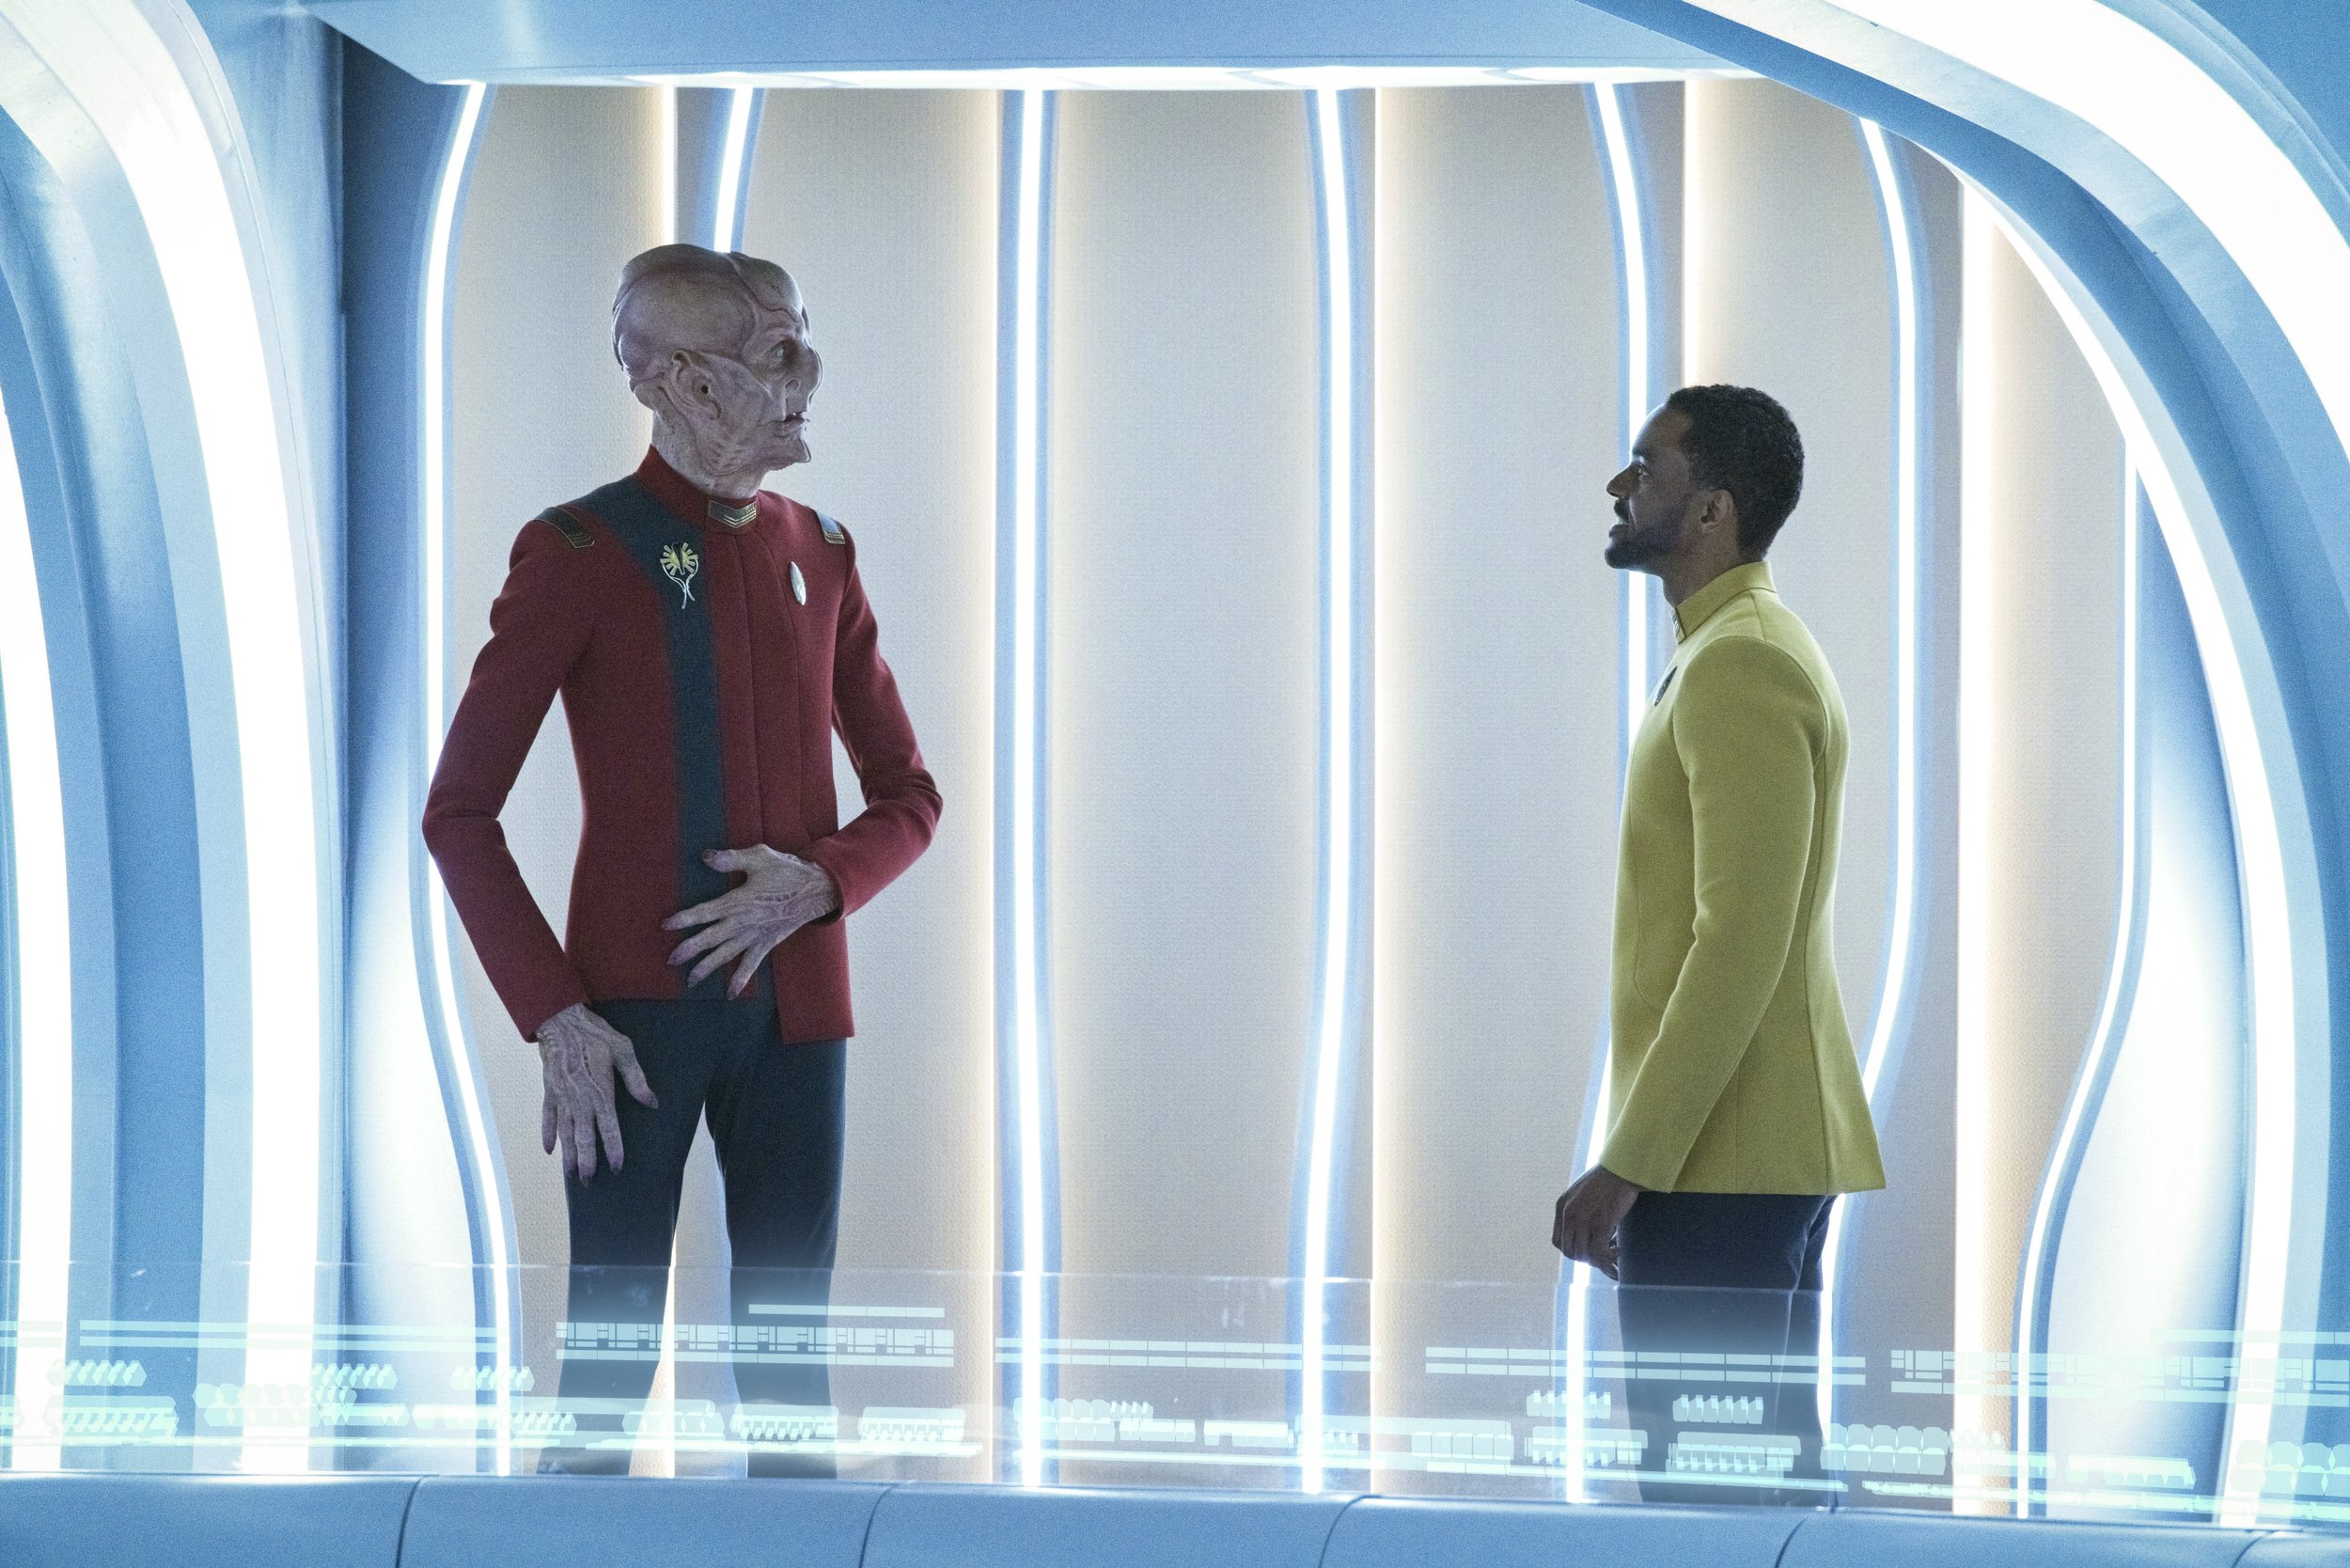   Pictured: Doug Jones as Saru and Ronnie Rowe as Lt. Bryce of the Paramount+ original series STAR TREK: DISCOVERY. Photo Cr: Michael Gibson/Paramount+ (C) 2021 CBS Interactive. All Rights Reserved.  